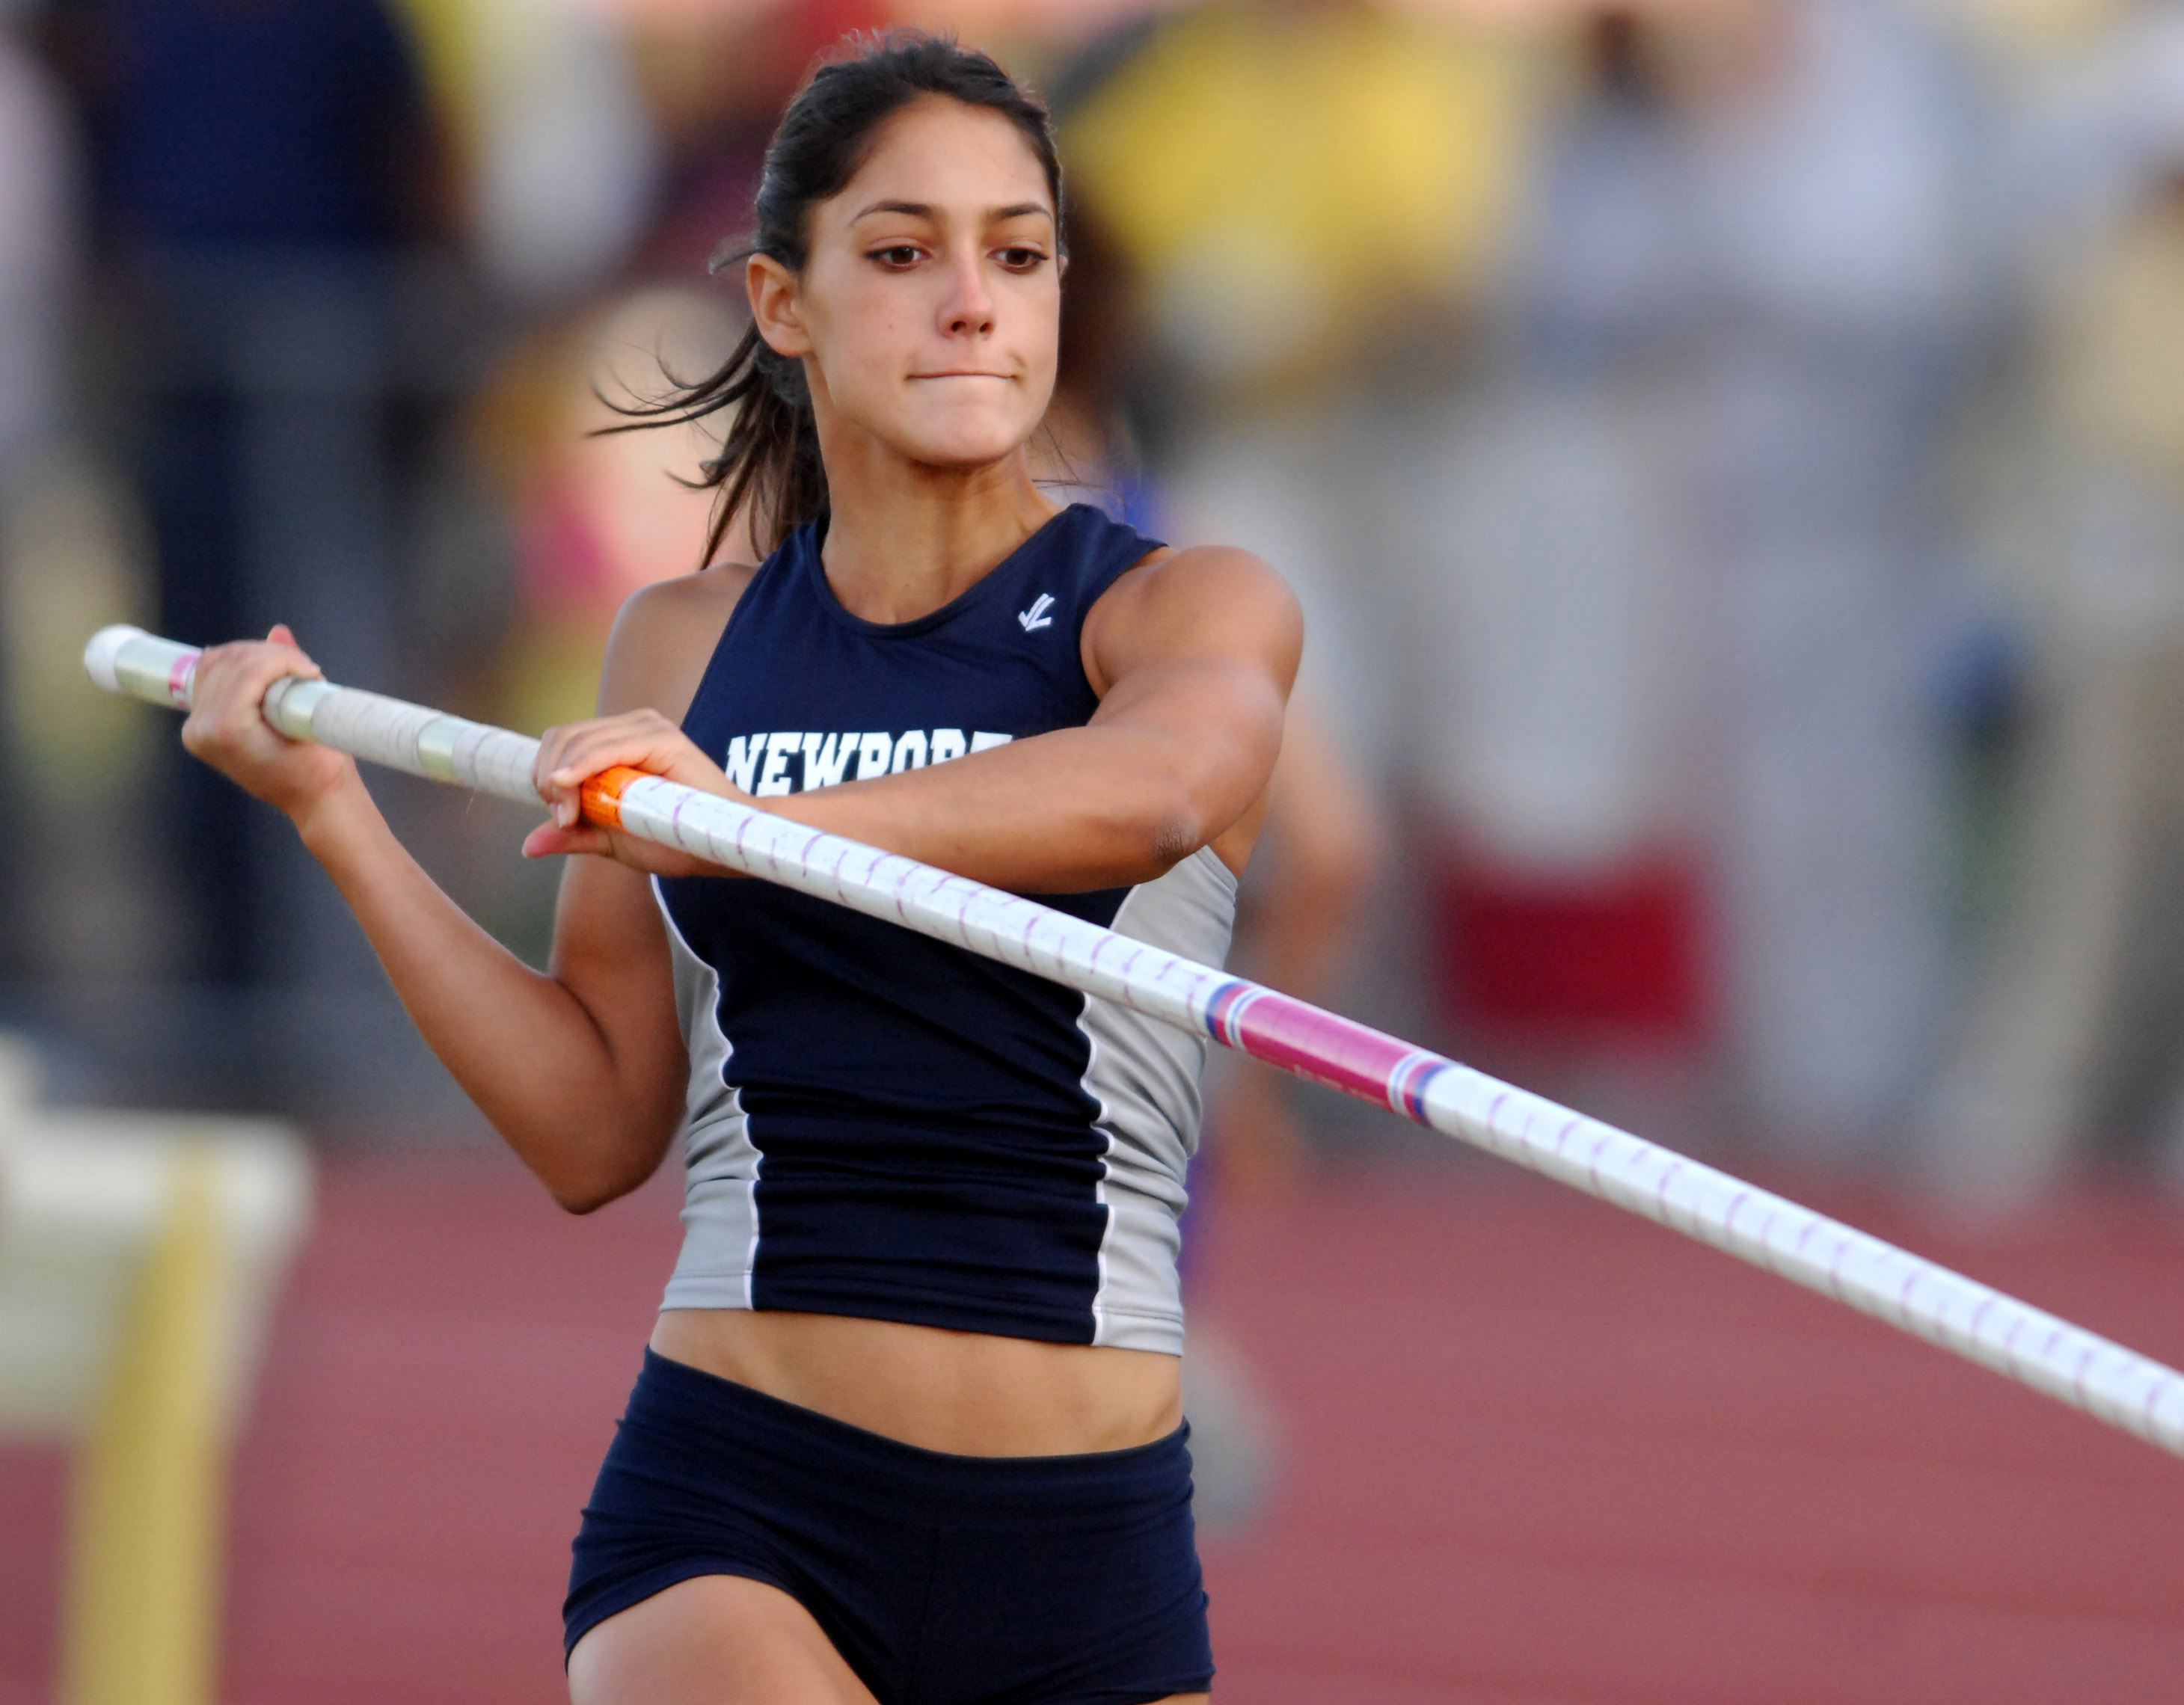 Free Download Pictures Of Allison Stokke on our website with great care. 